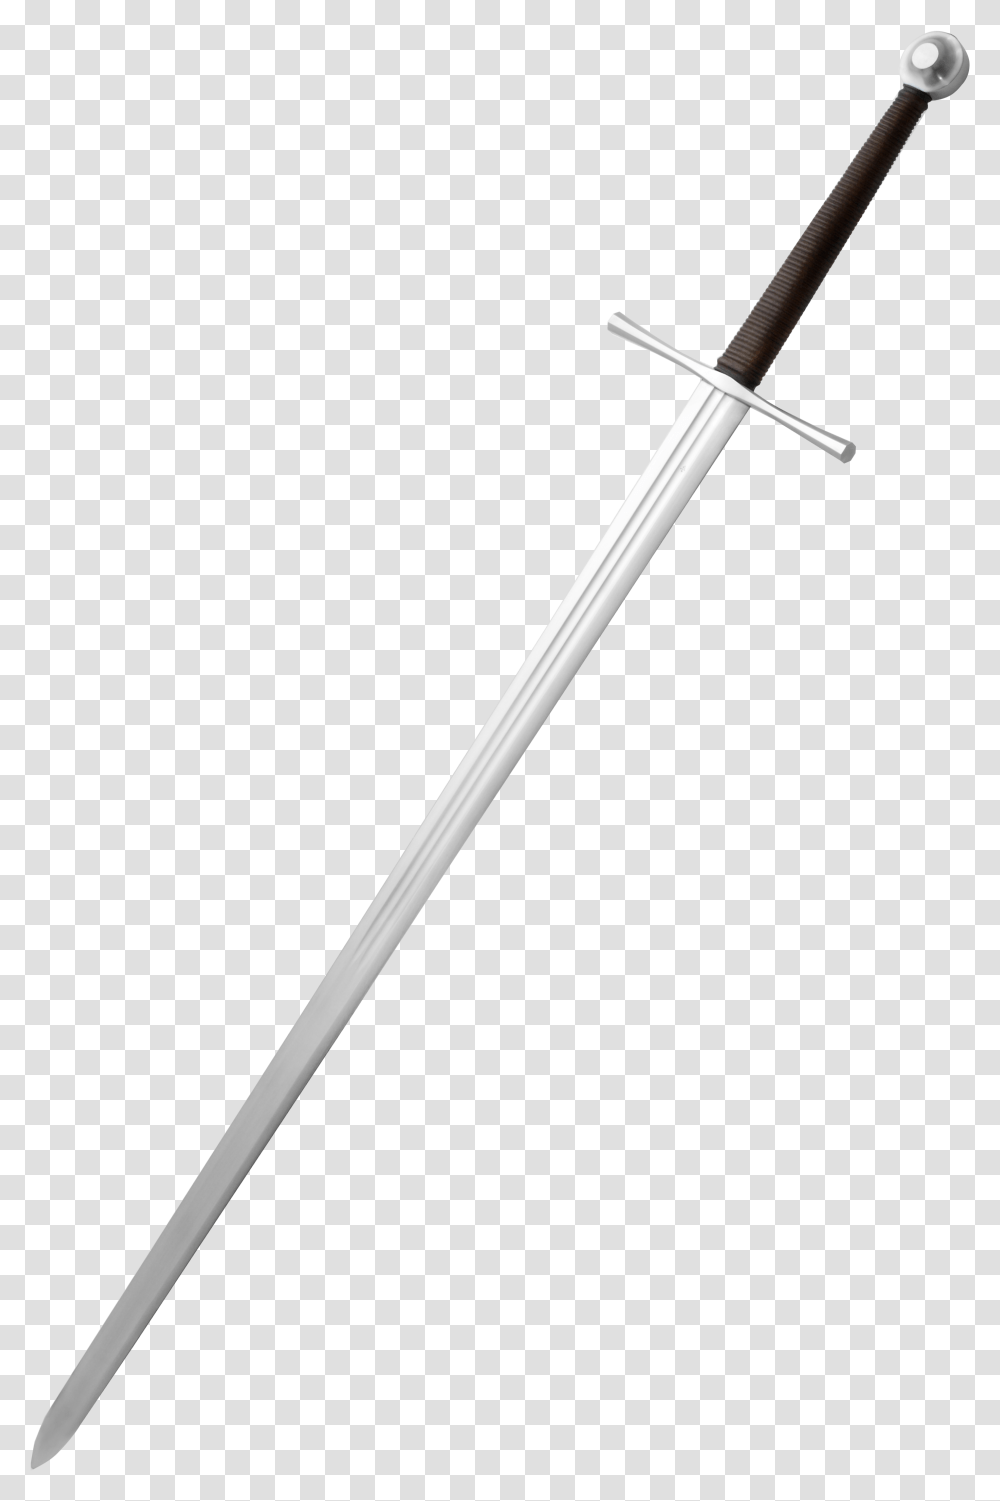 Classification Of Swords White Sword, Blade, Weapon, Weaponry Transparent Png